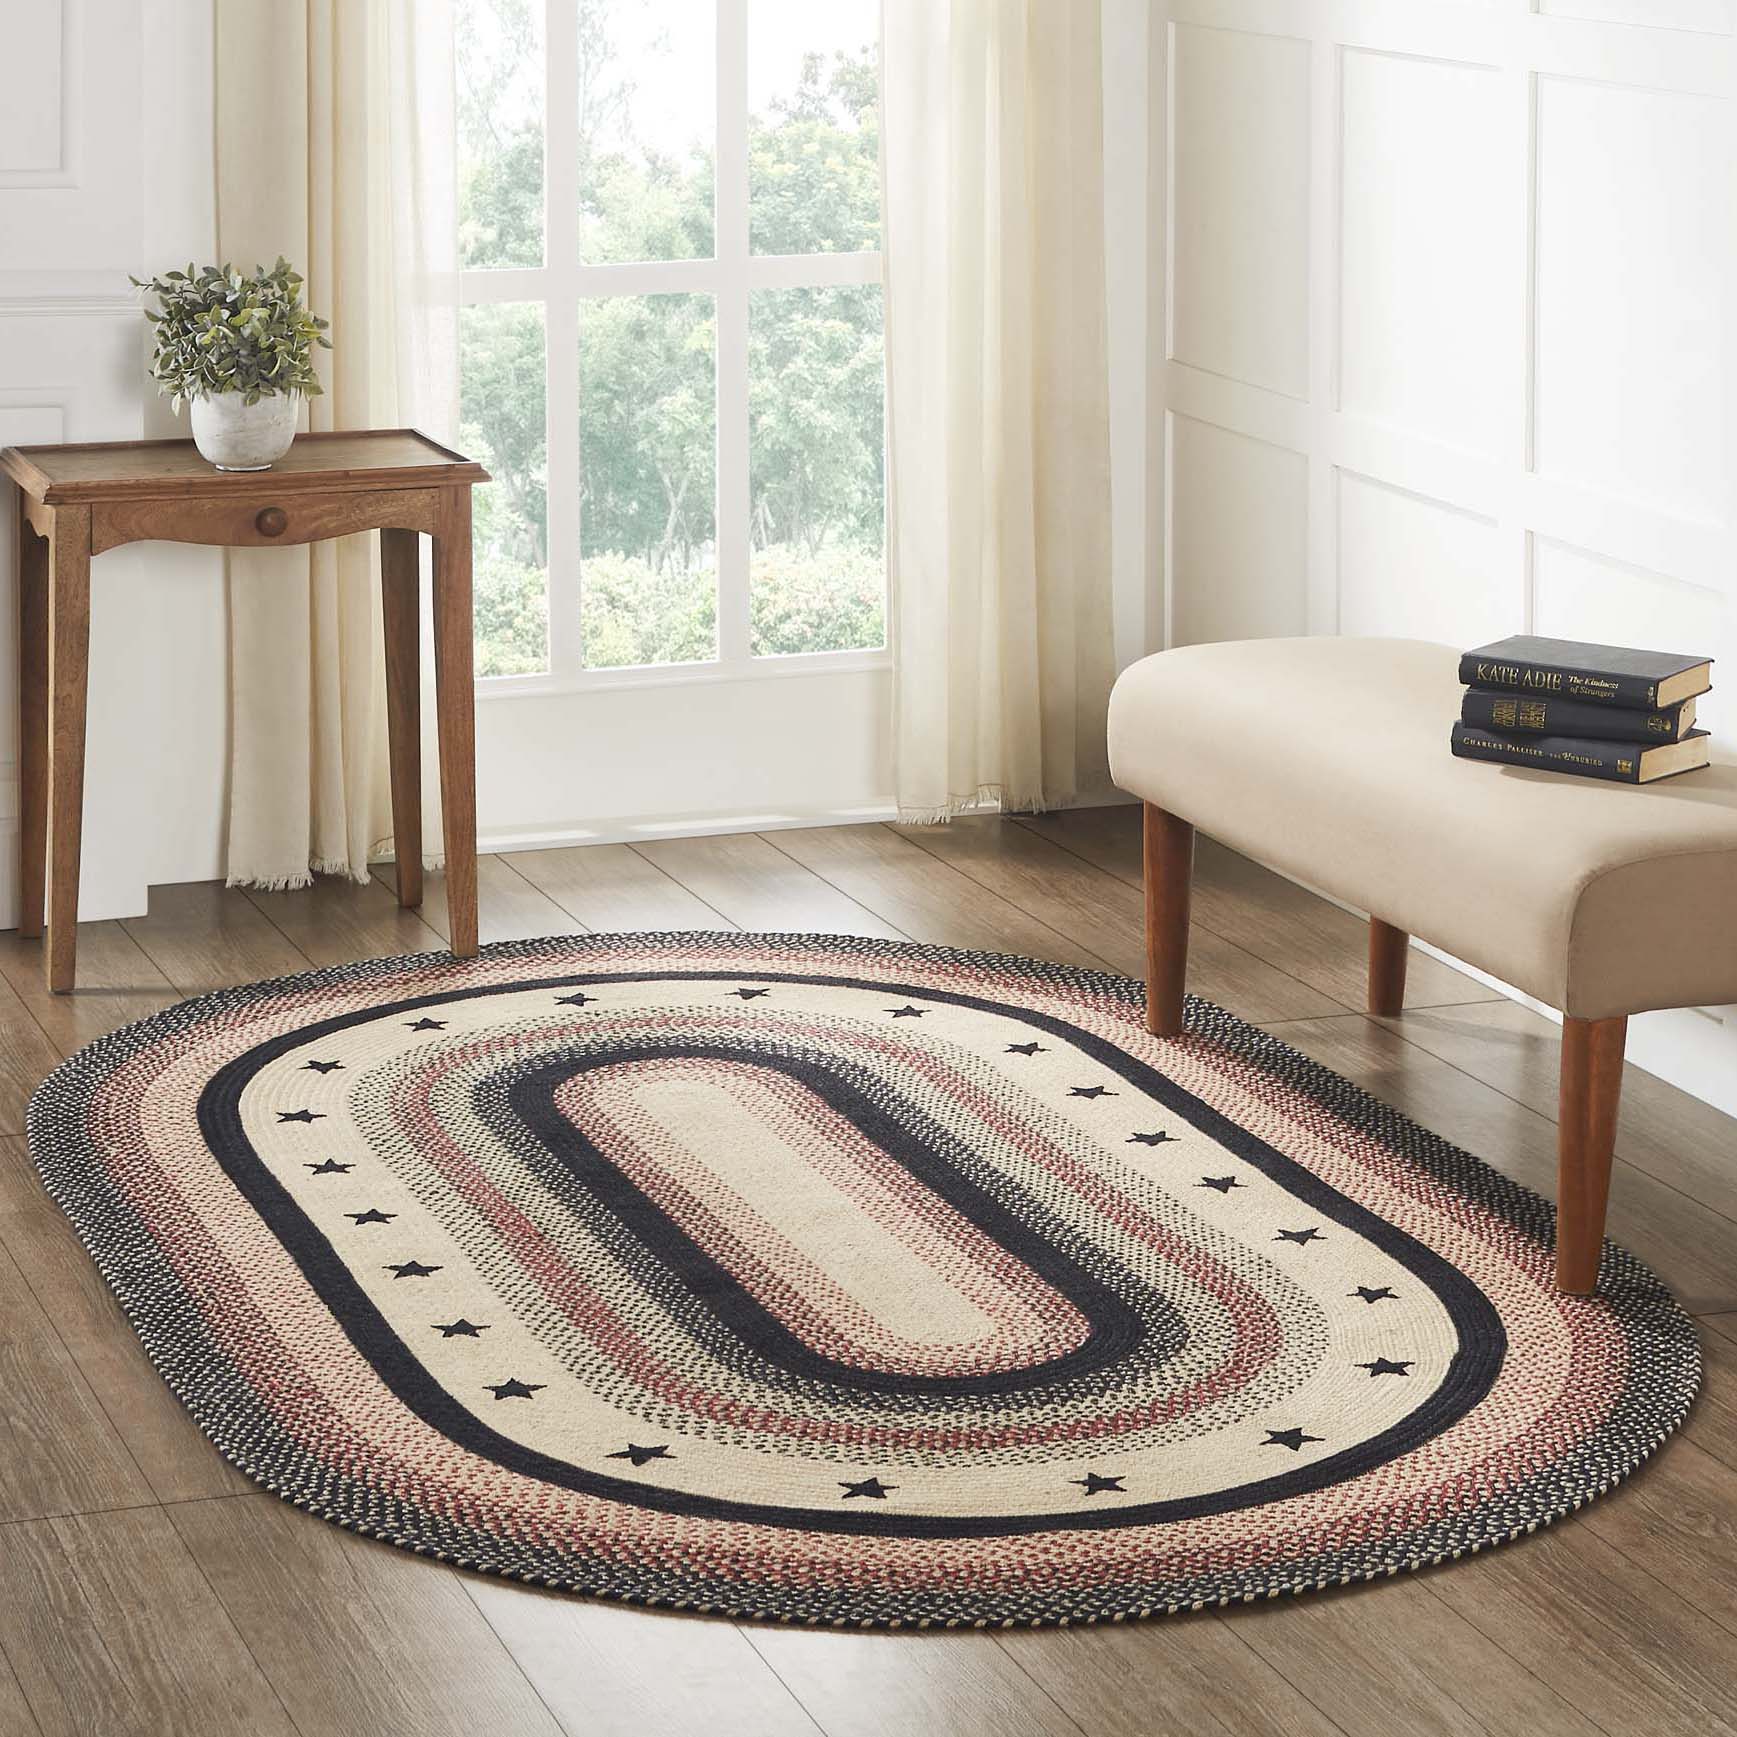 The Braided Rug Place  Rugs and Table Top Accents